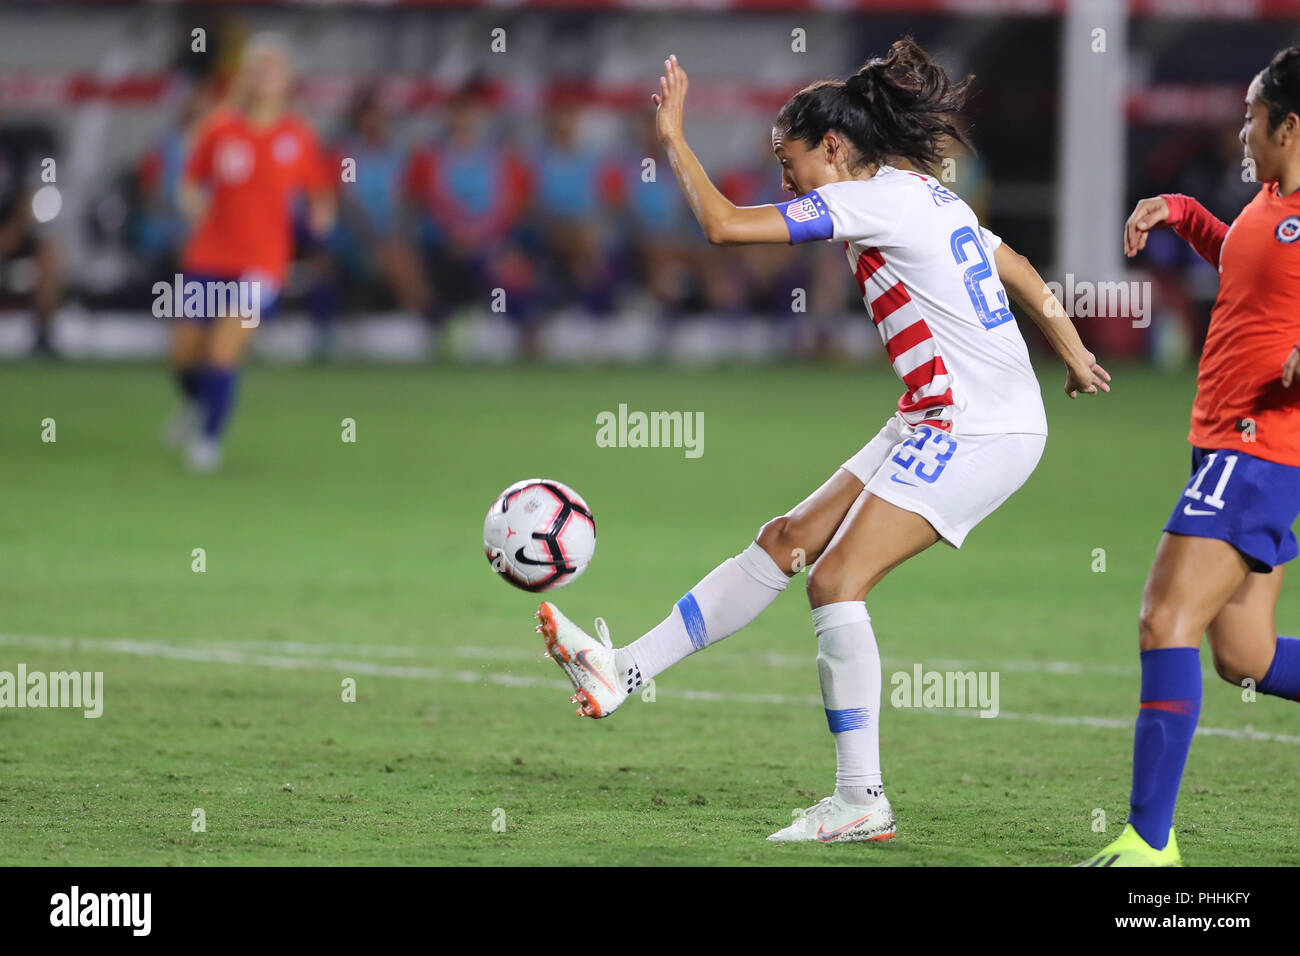 August 31, 2018: USA forward Christen Press (23) tries to flip the ball over the goalkeeper during the game between Chile and USA on August 31, 2018, at the StubHub Center in Carson, CA. USA. (Photo by Peter Joneleit) Stock Photo